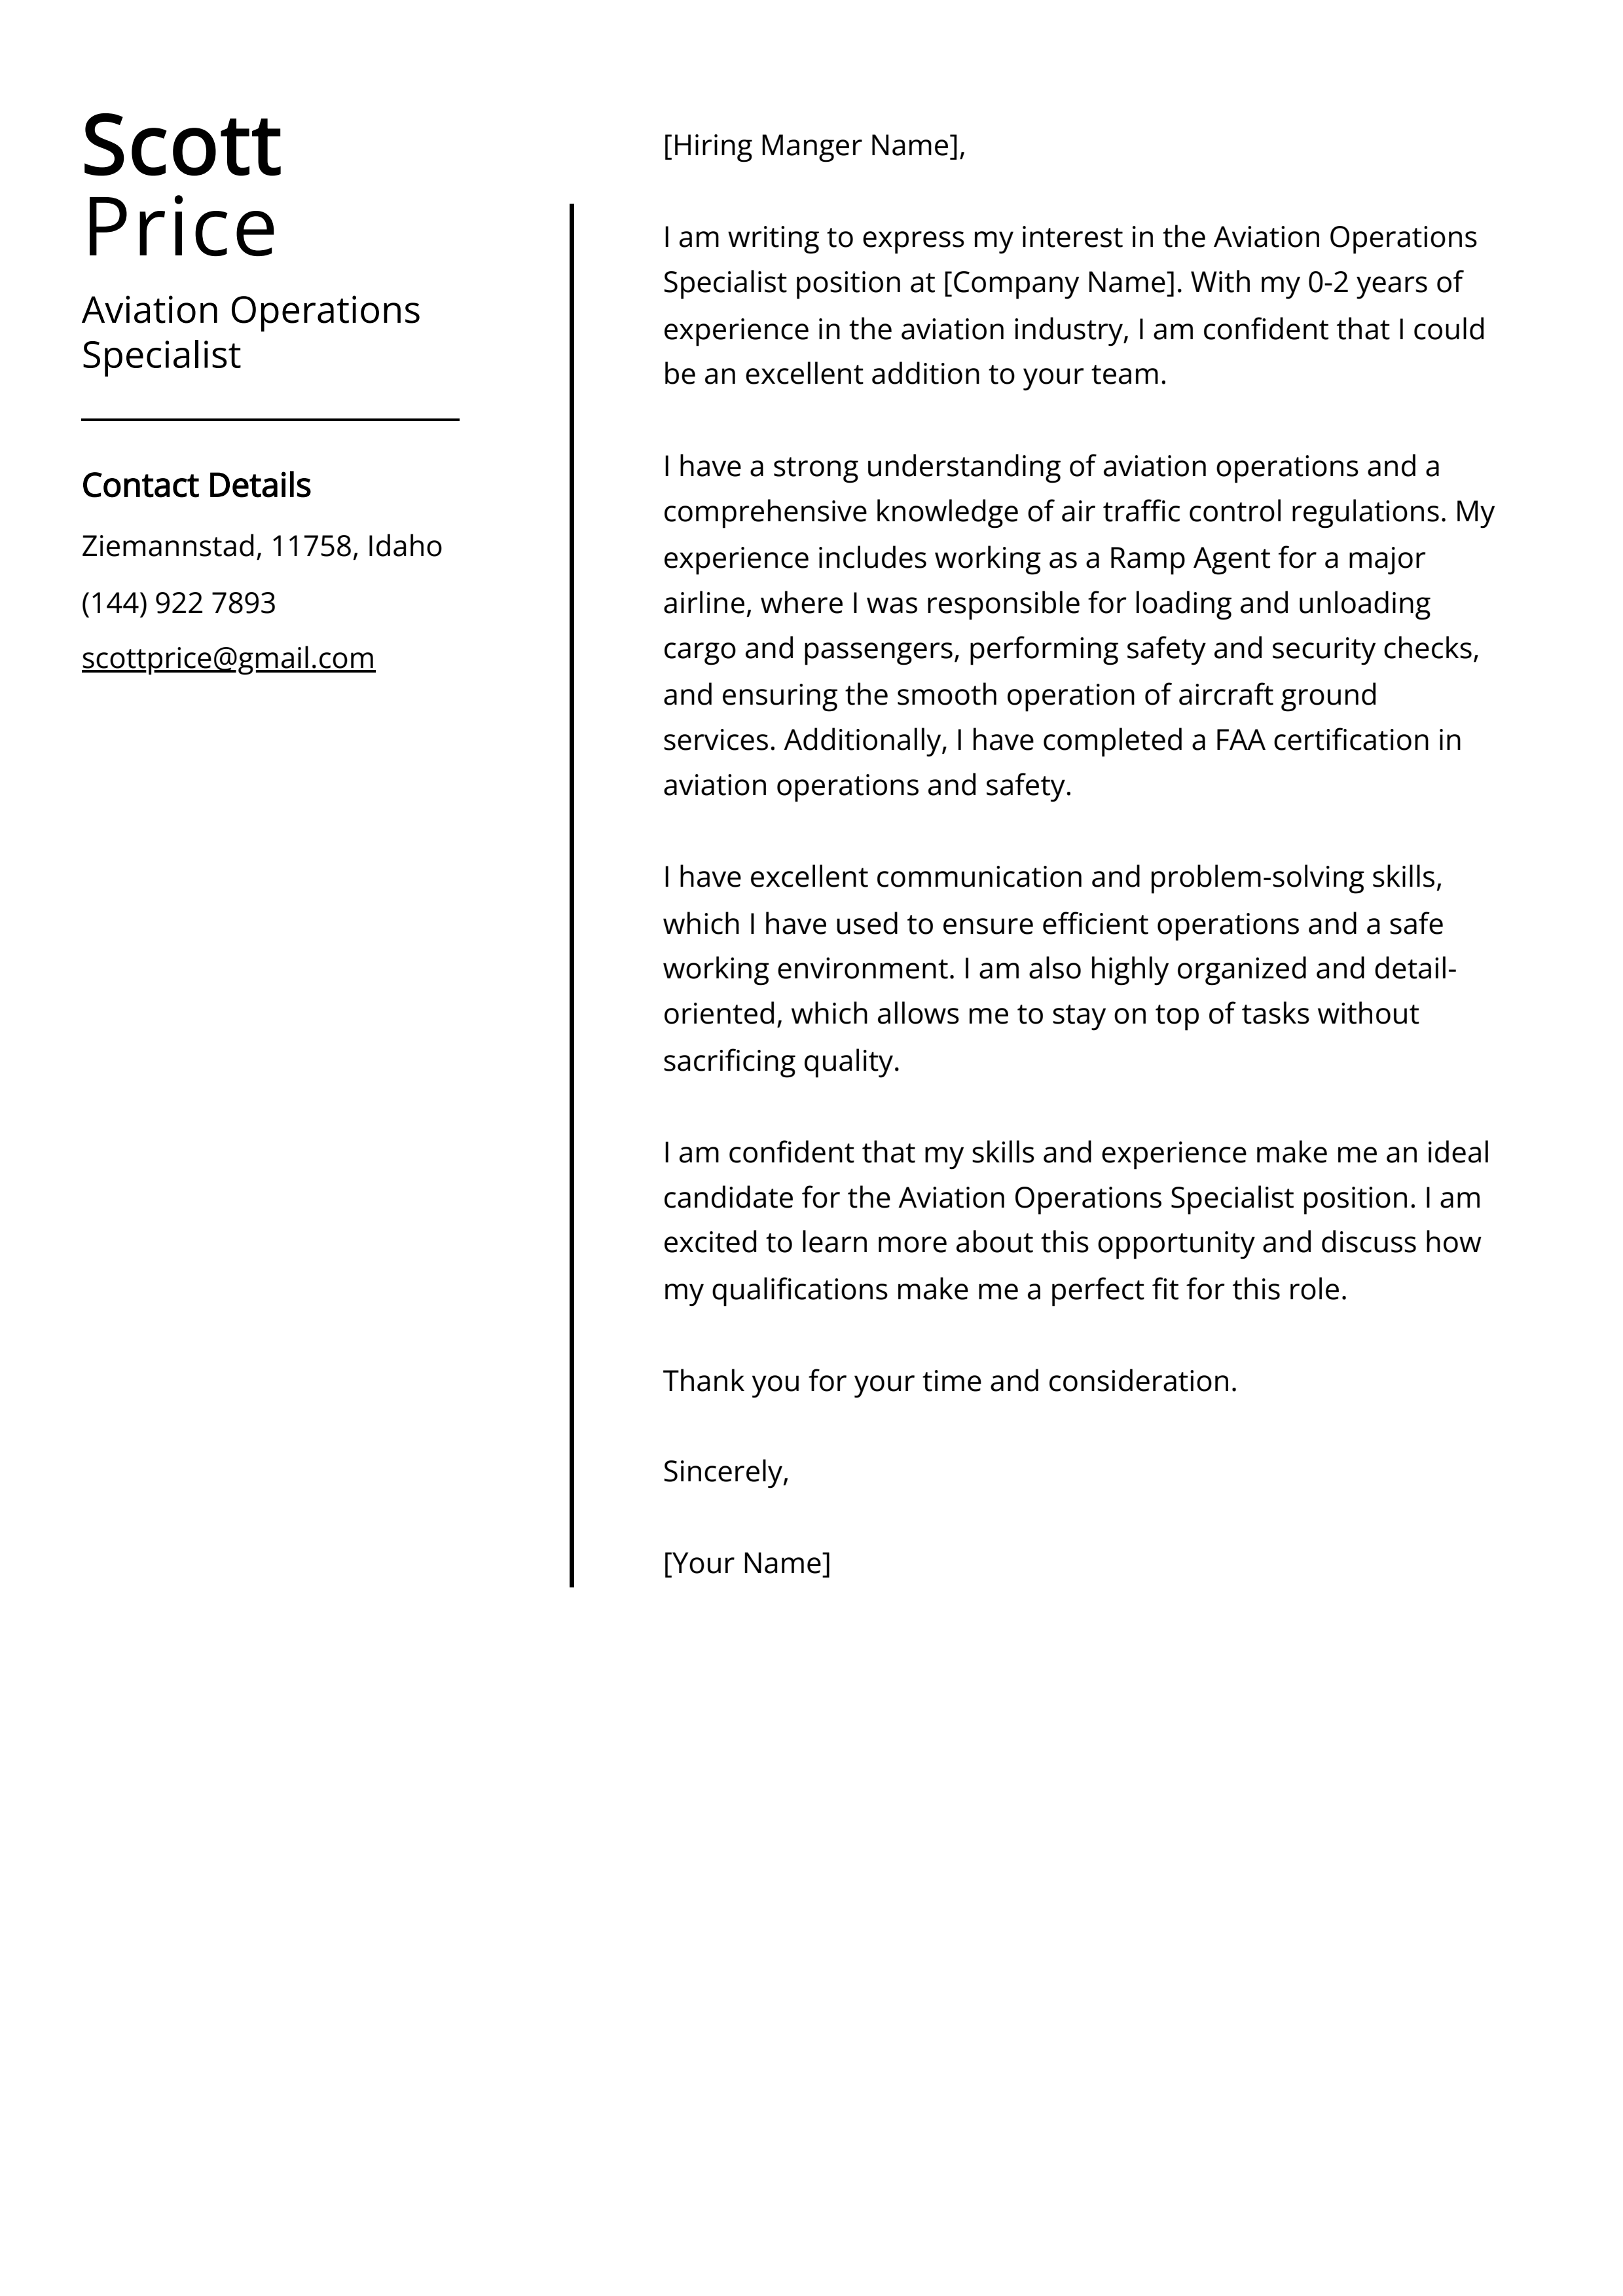 Aviation Operations Specialist Cover Letter Example